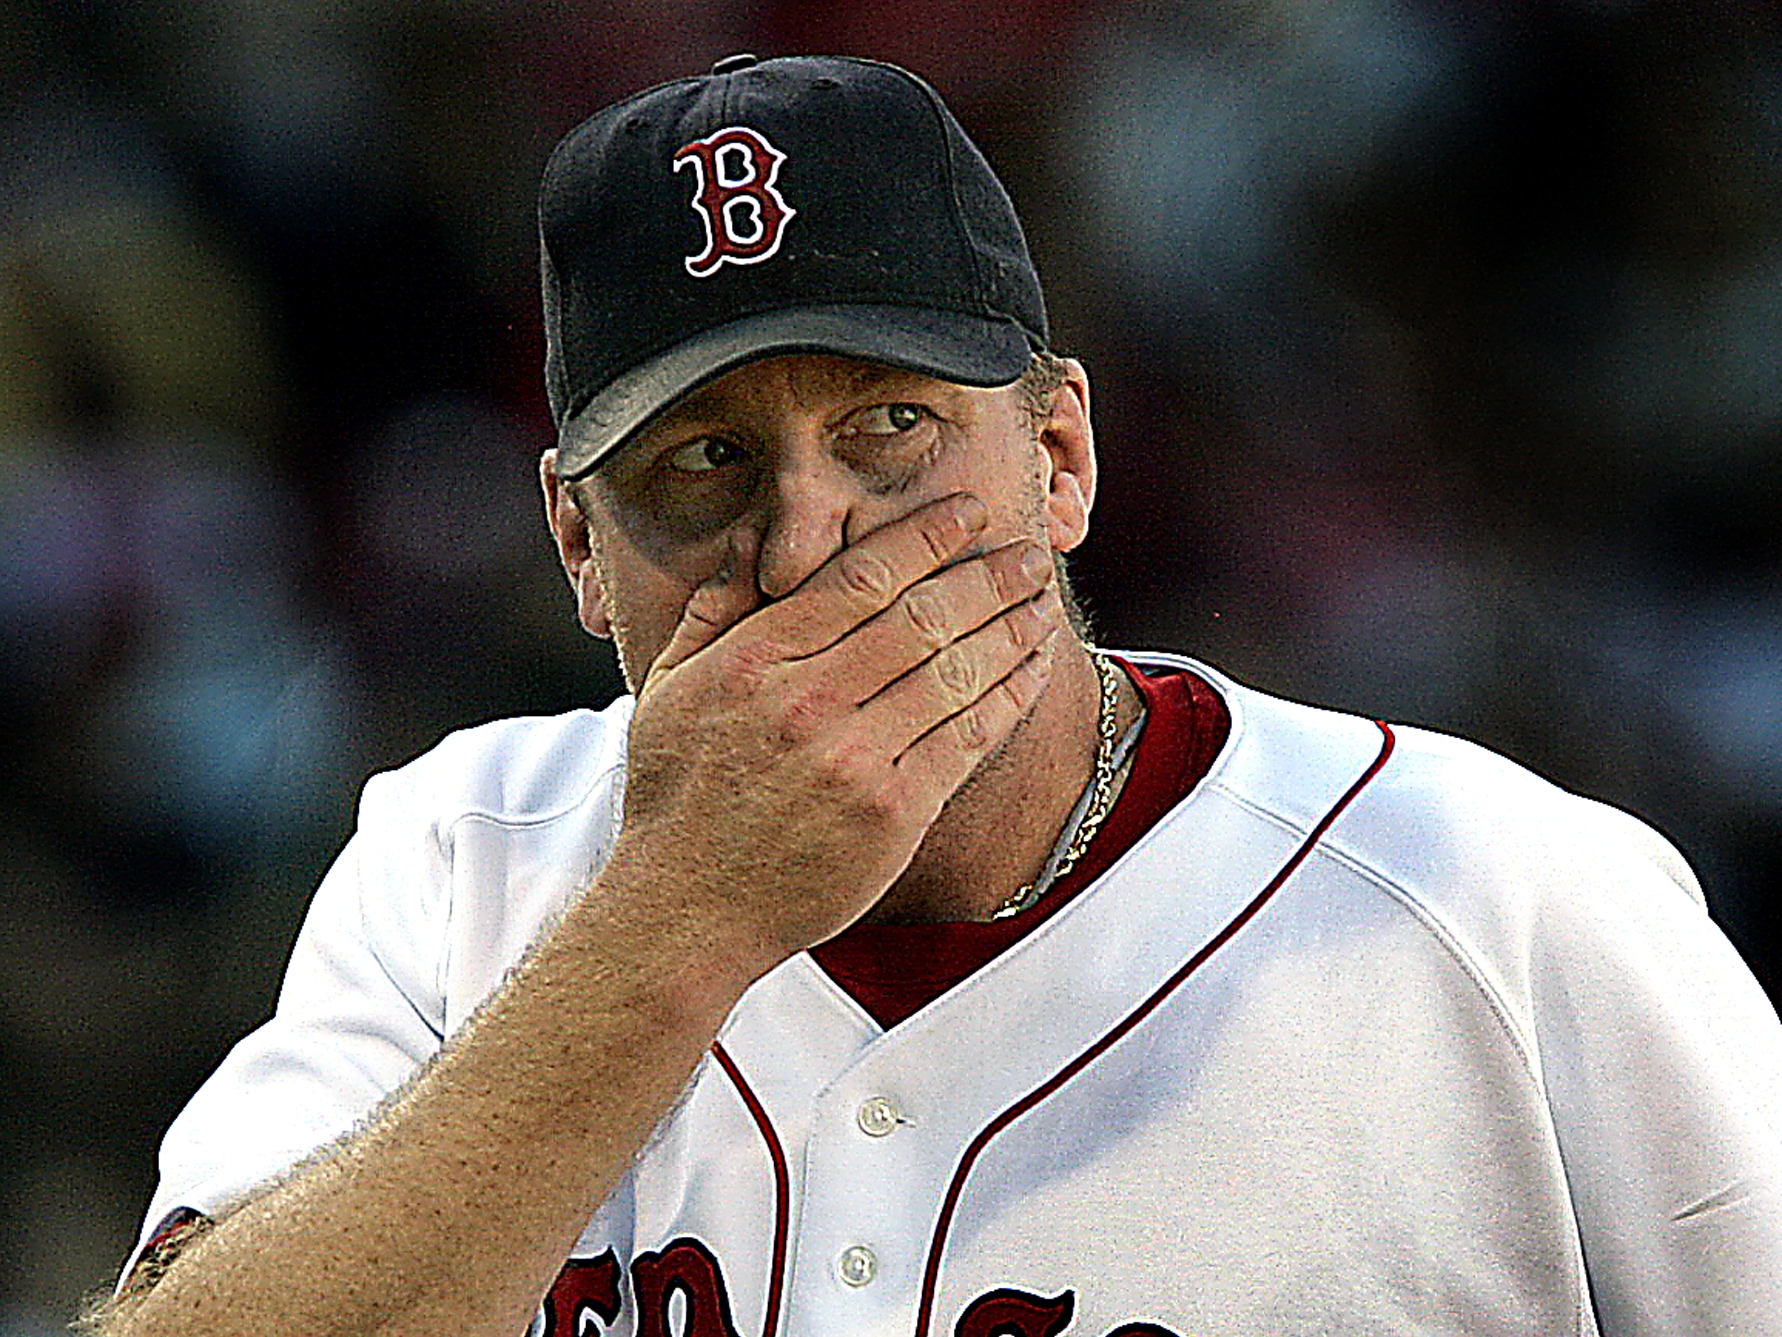 Curt Schilling, ESPN Analyst, Is Fired Over Offensive Social Media Post -  The New York Times